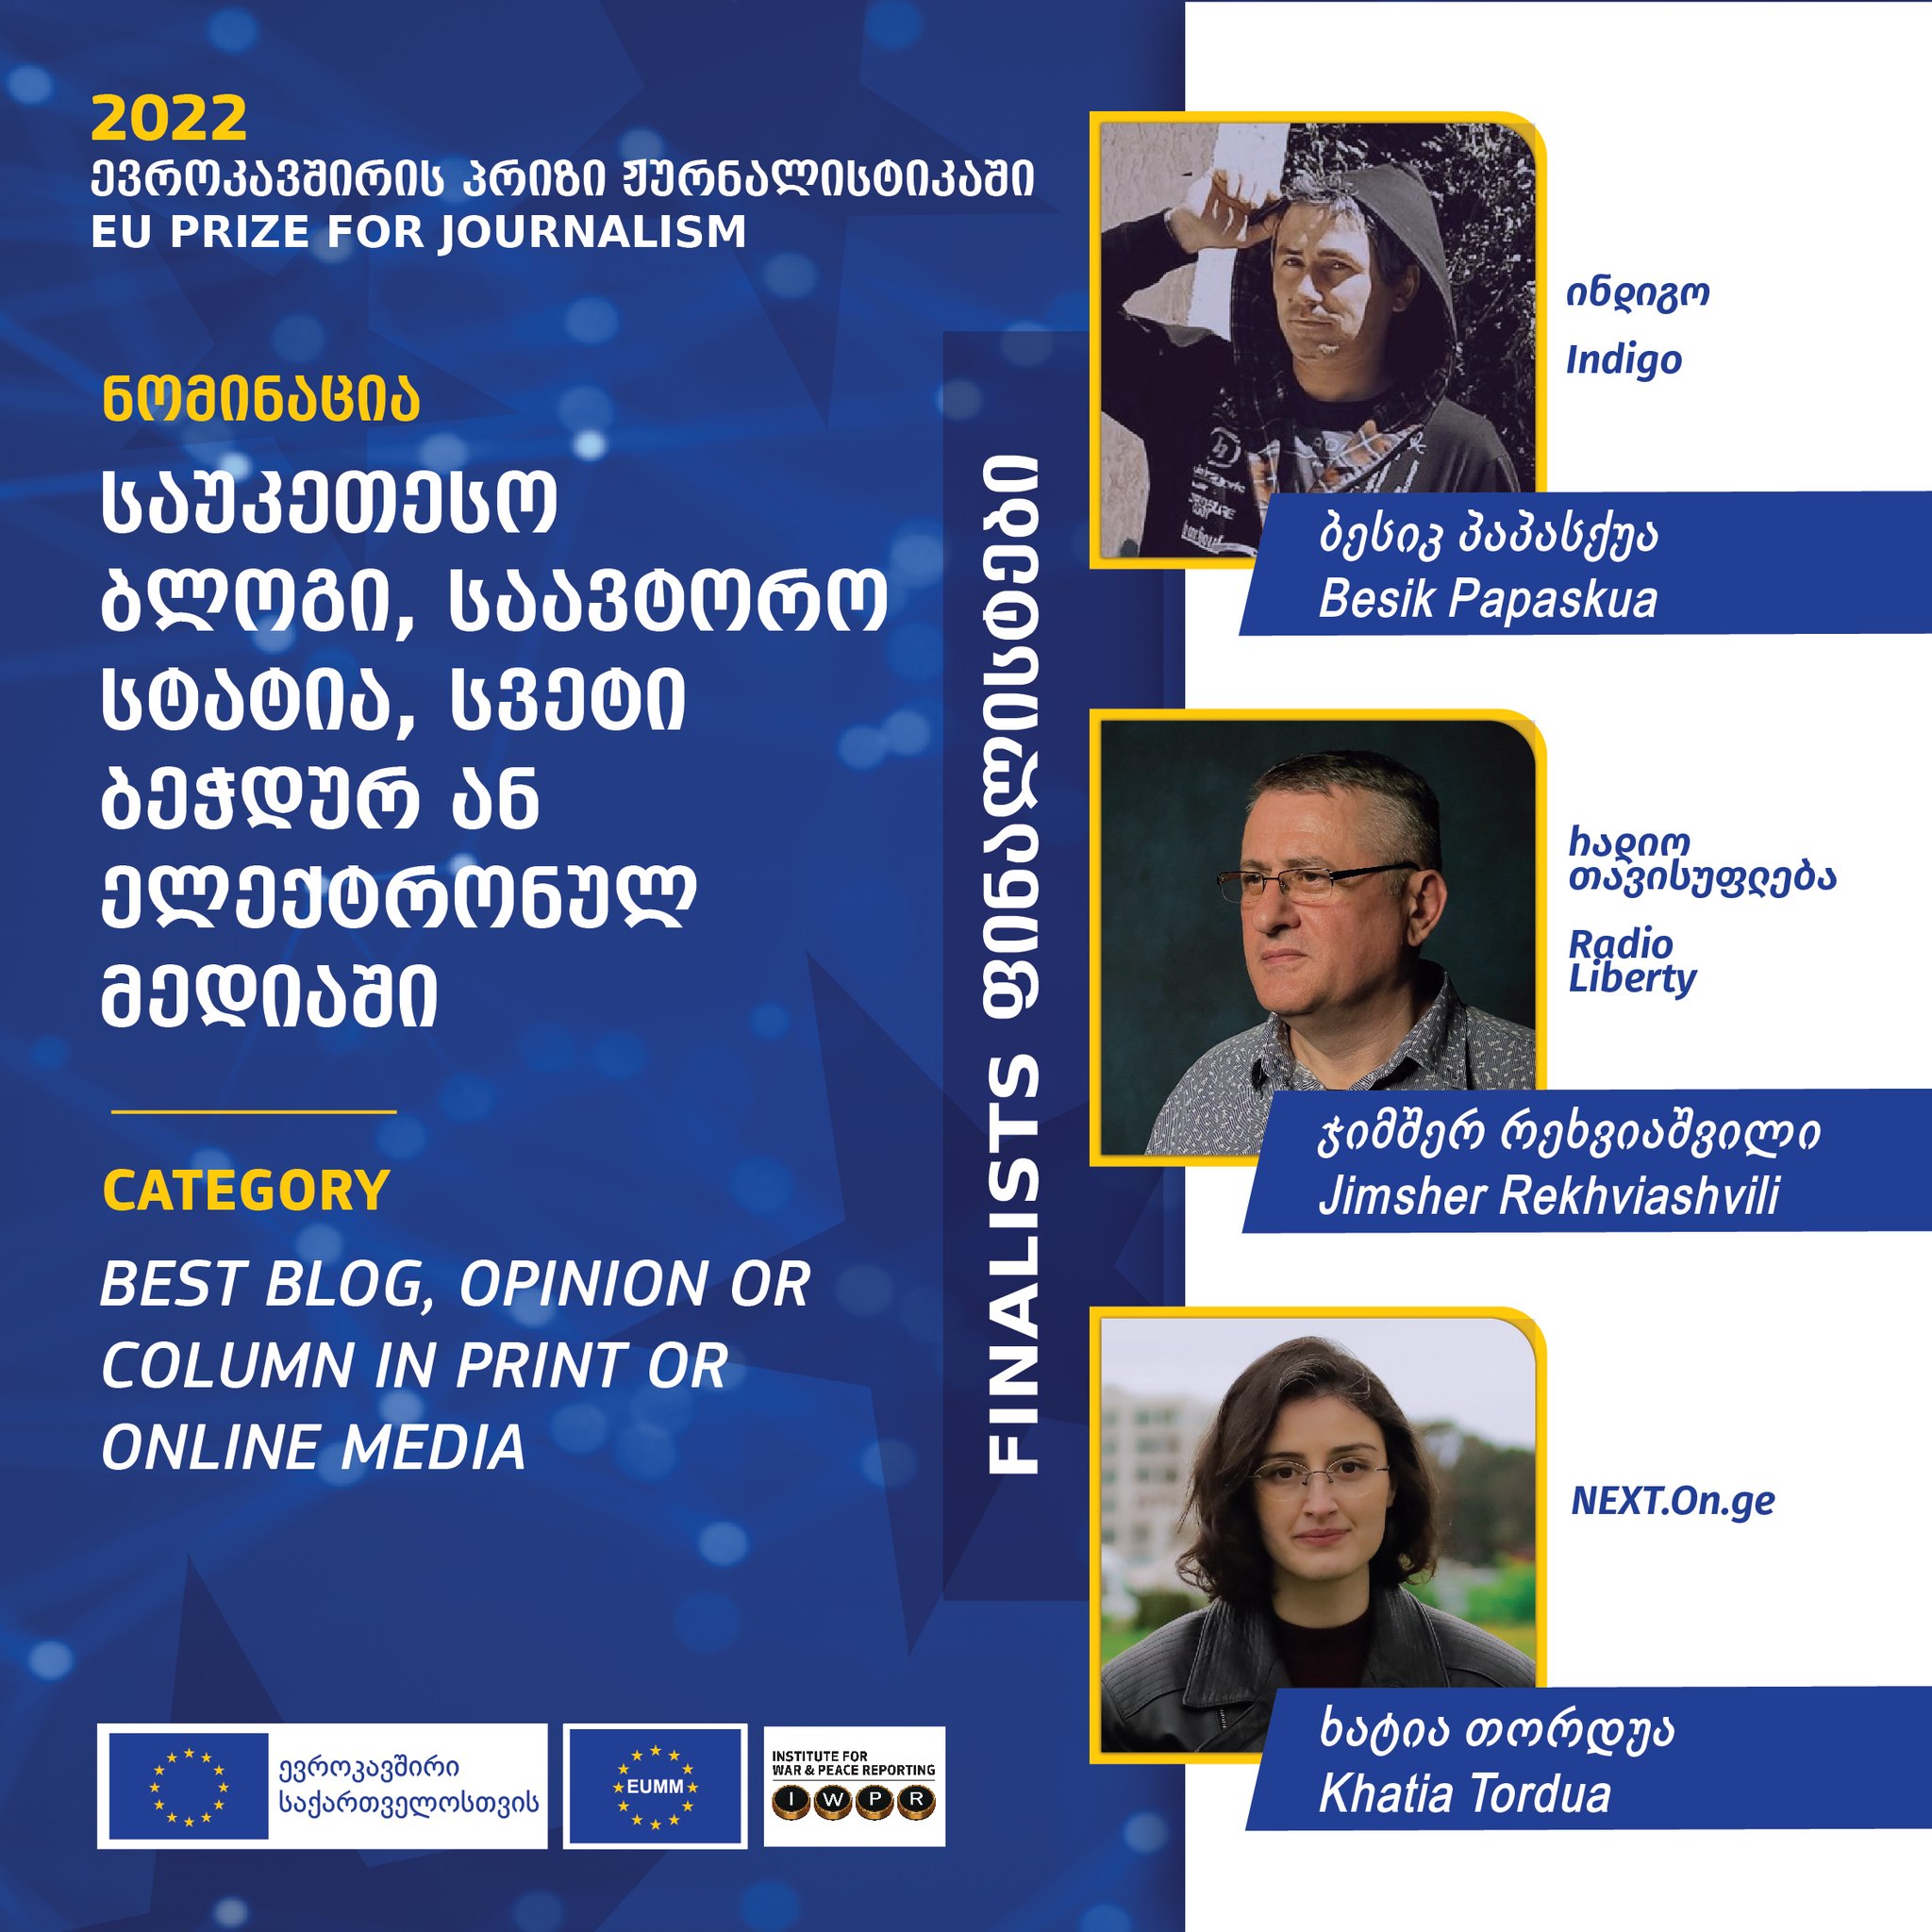 The nominees in the category of “Best blog, opinion or column in print or online media” for the EU Prize for Journalism have been revealed